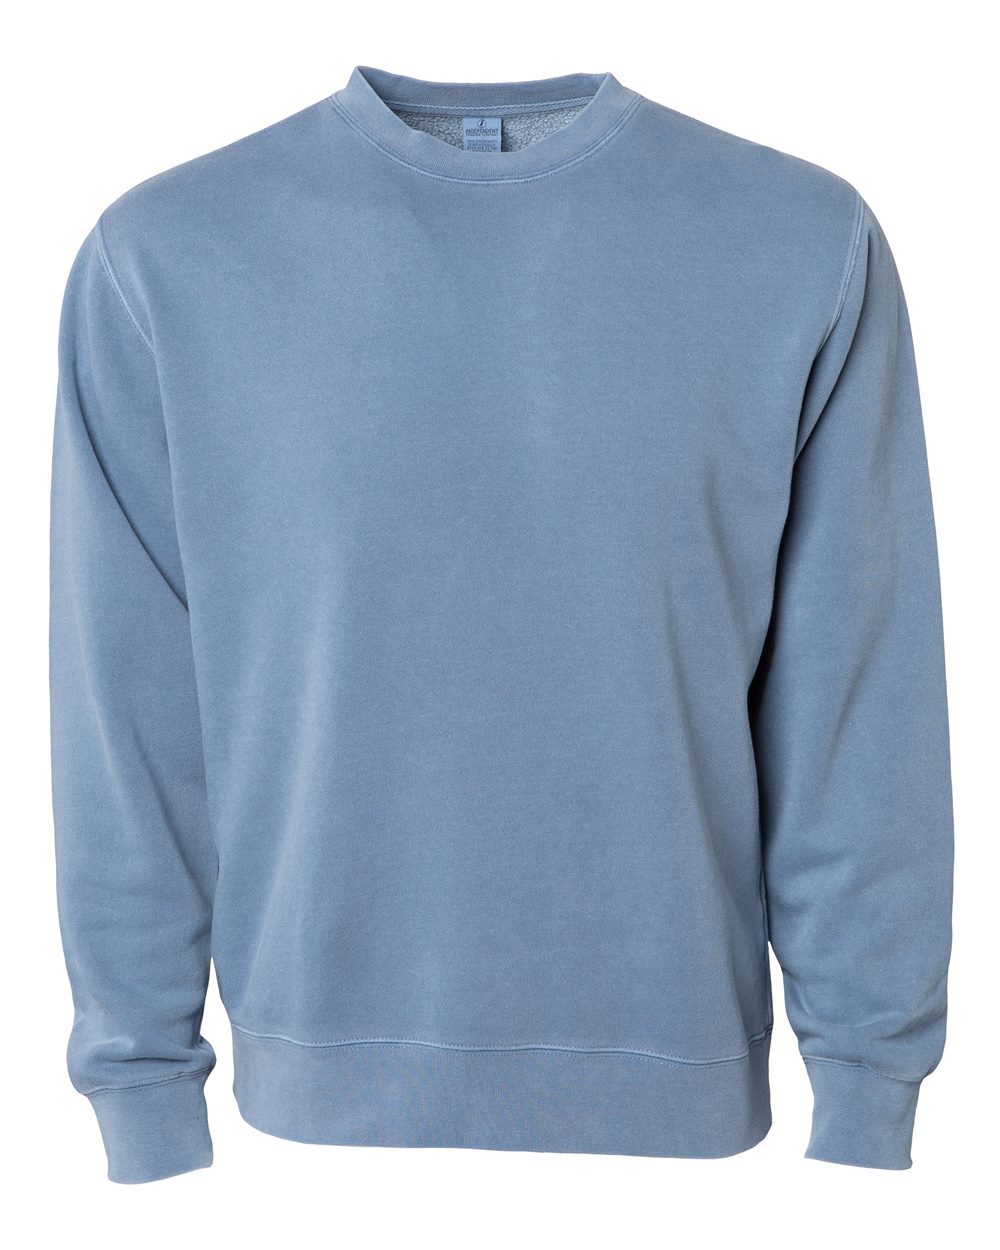 Independent Trading Co. PRM3500 - Unisex Pigment Dyed Crew Neck